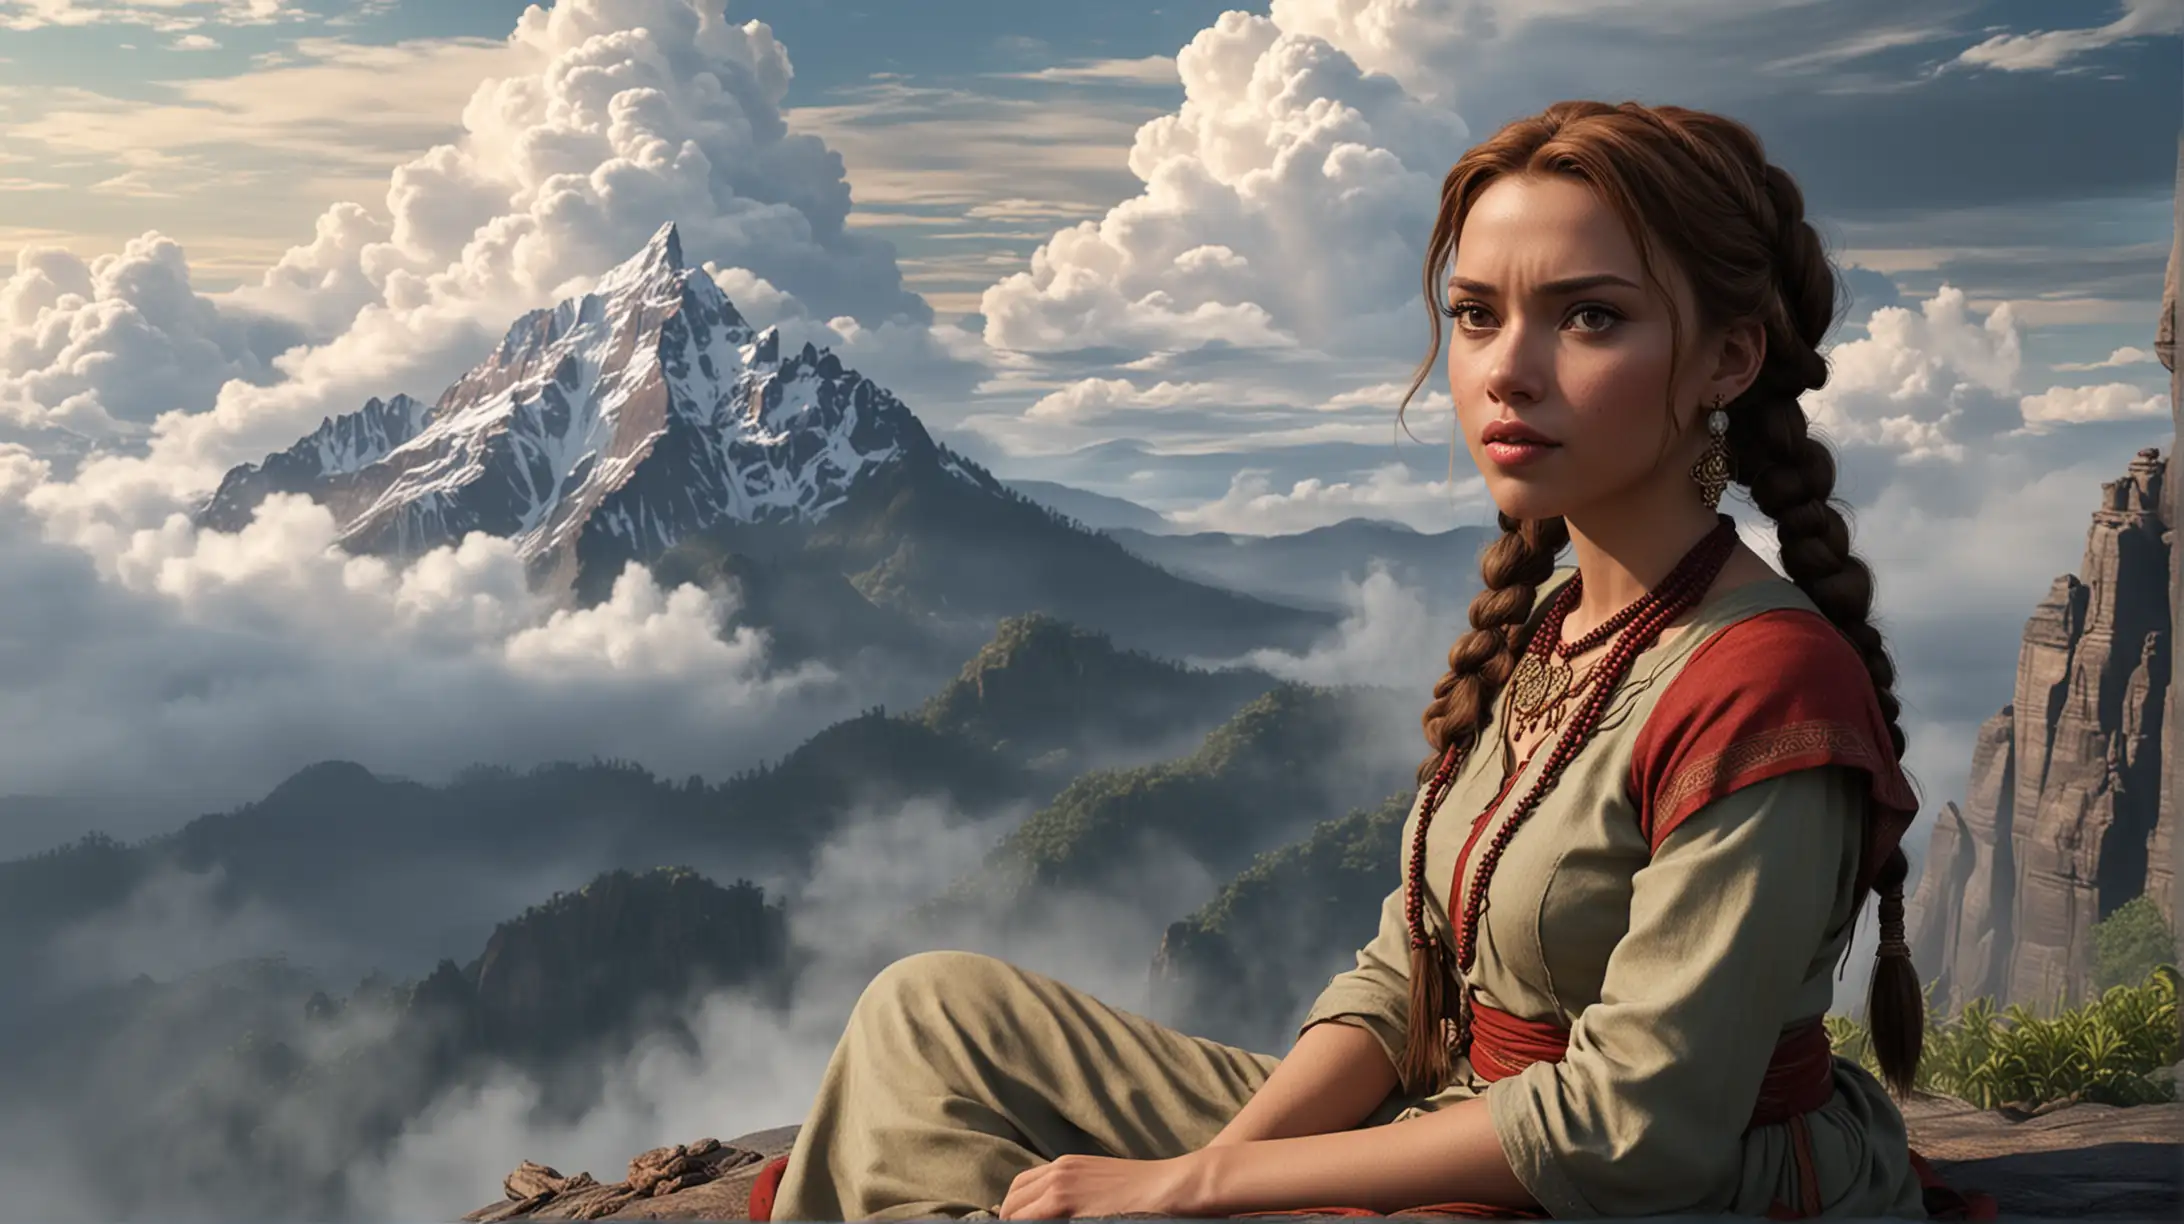 Cartoon Illustration of Scarlett Johansson as Indian Woman Sitting atop a Mountain in the Clouds